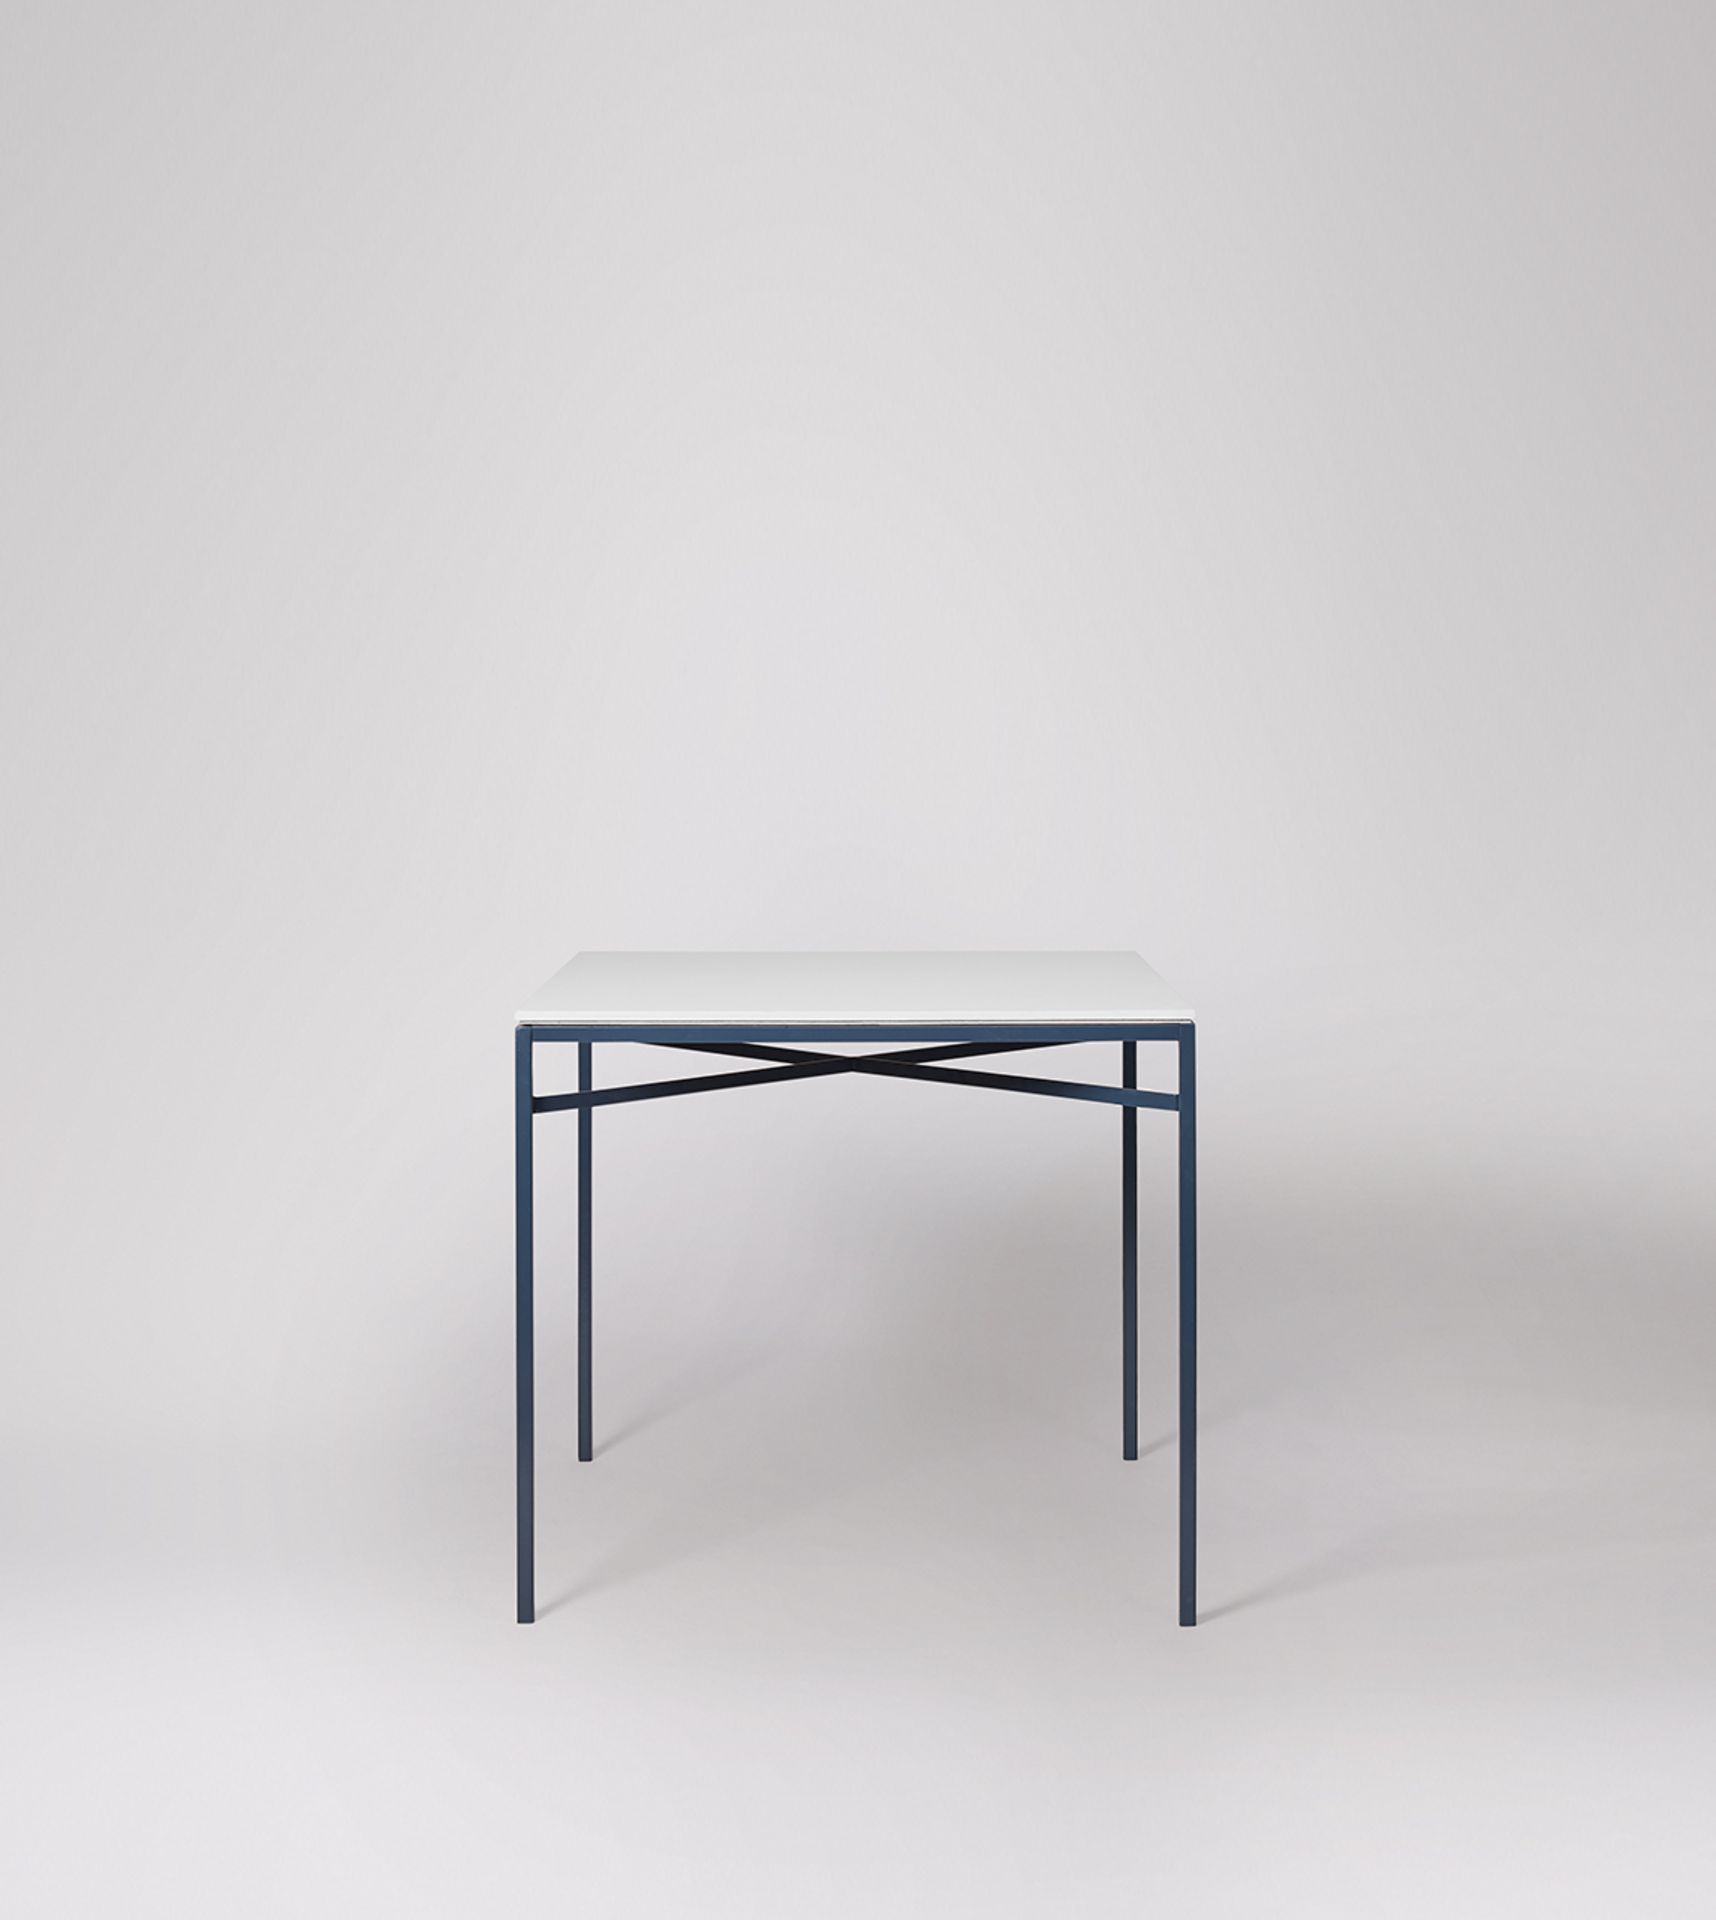 Swoon Docklands Dining Square Dining Table Navy and White RRP 199.00